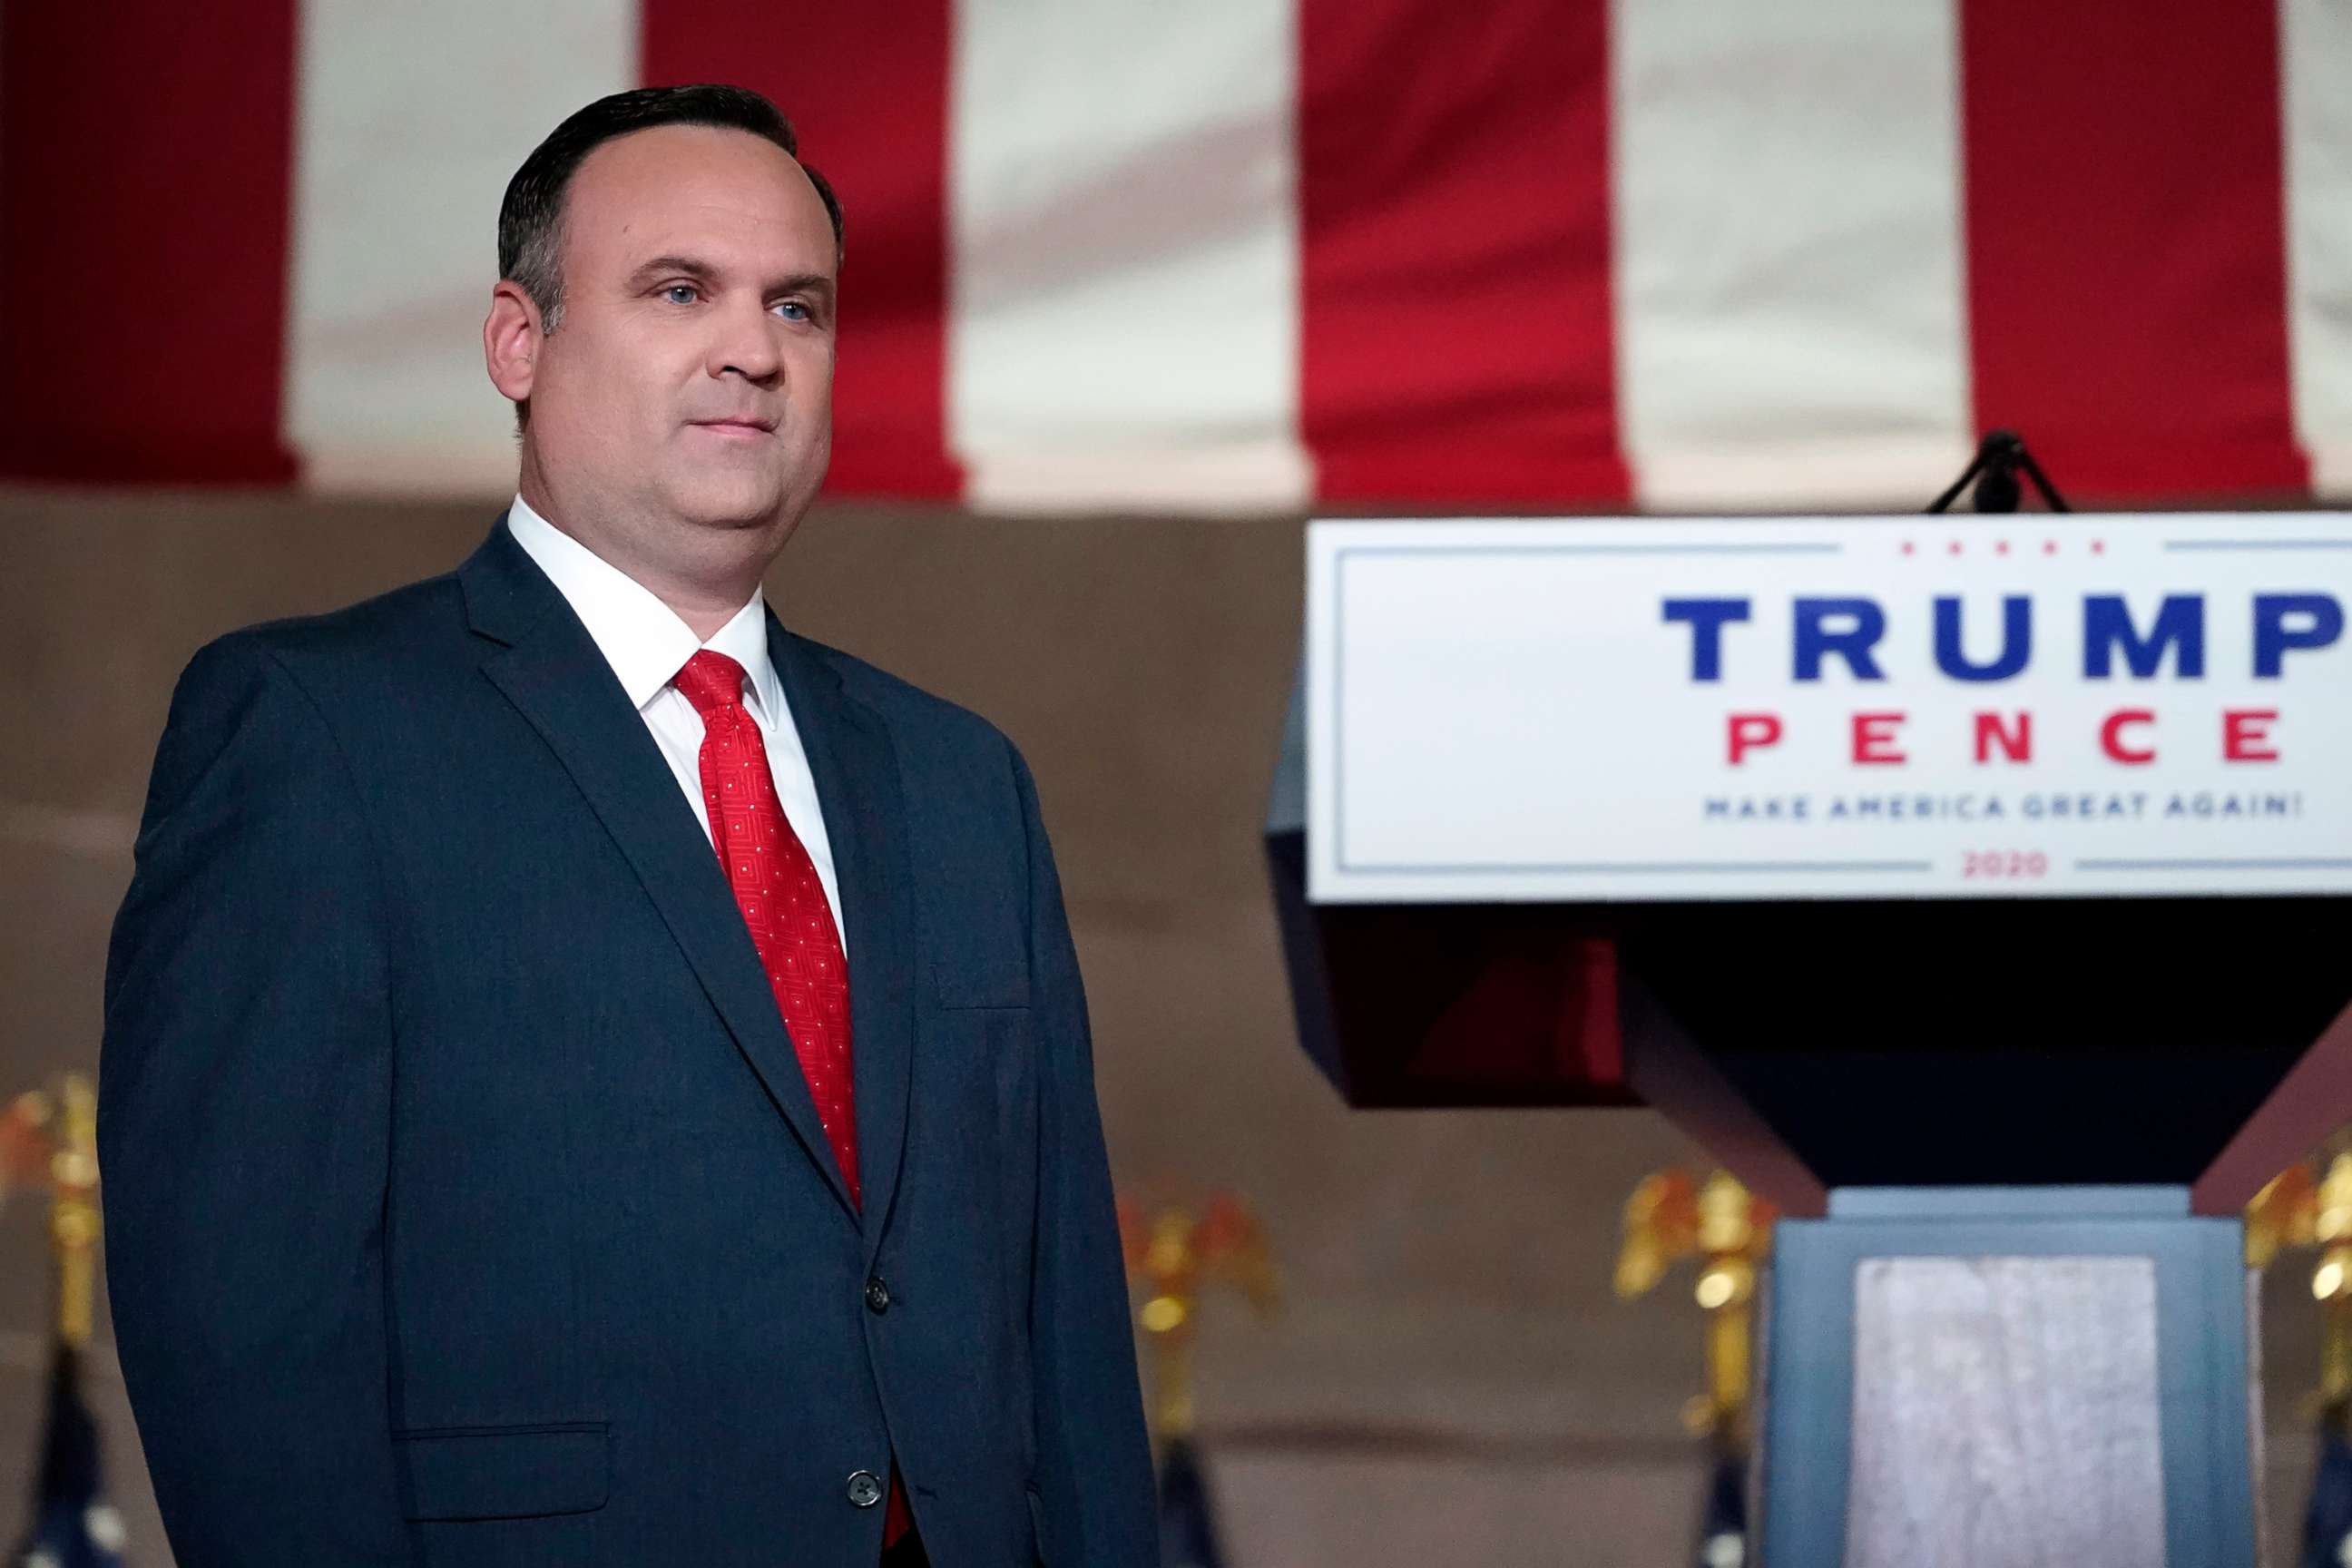 PHOTO: In this Aug. 26, 2020, file photo, White House Deputy Chief of Staff for Communications Dan Scavino walks on stage to tape his speech for the Republican National Convention from the Andrew W. Mellon Auditorium, in Washington, D.C.